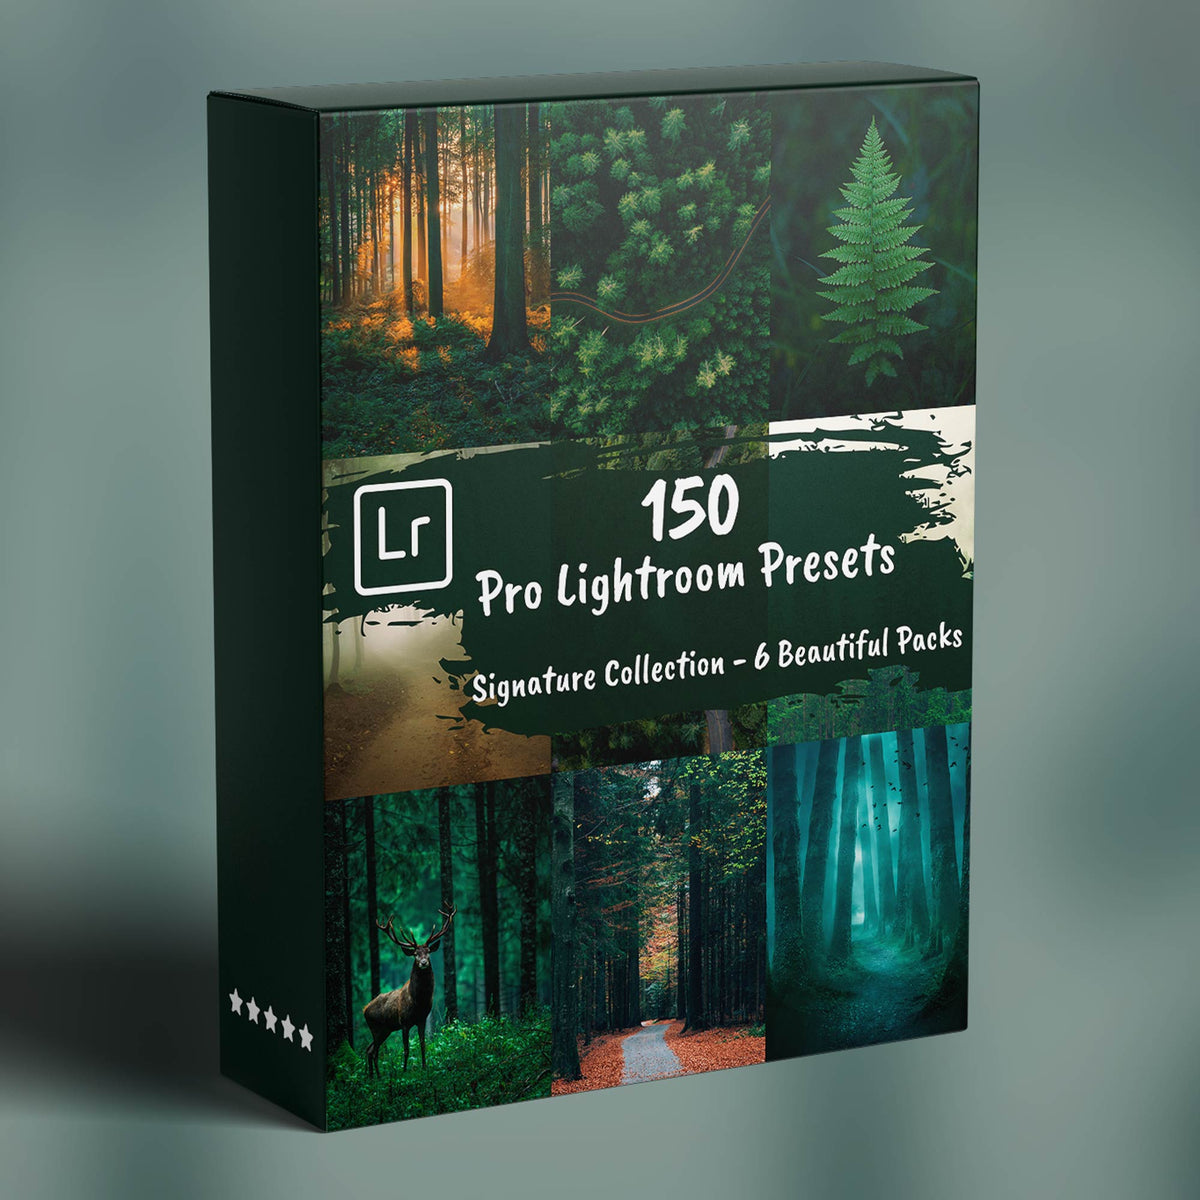 150 Lightroom Presets - 6 Packs Signature Collection